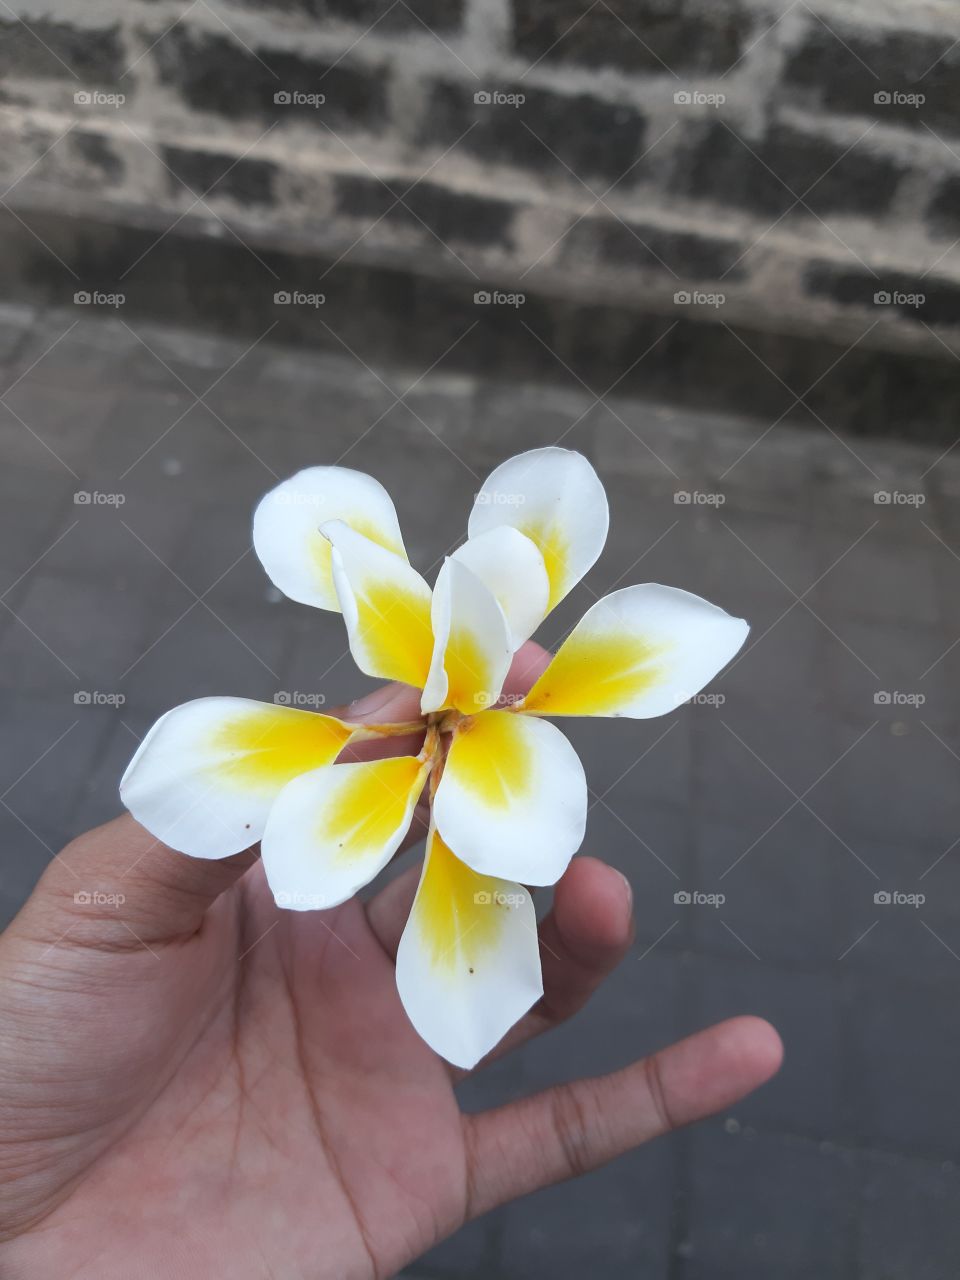 A plumeria acutifolia hold in a hand. This flower can be used as a decorative flower and a means of praying for balinese.